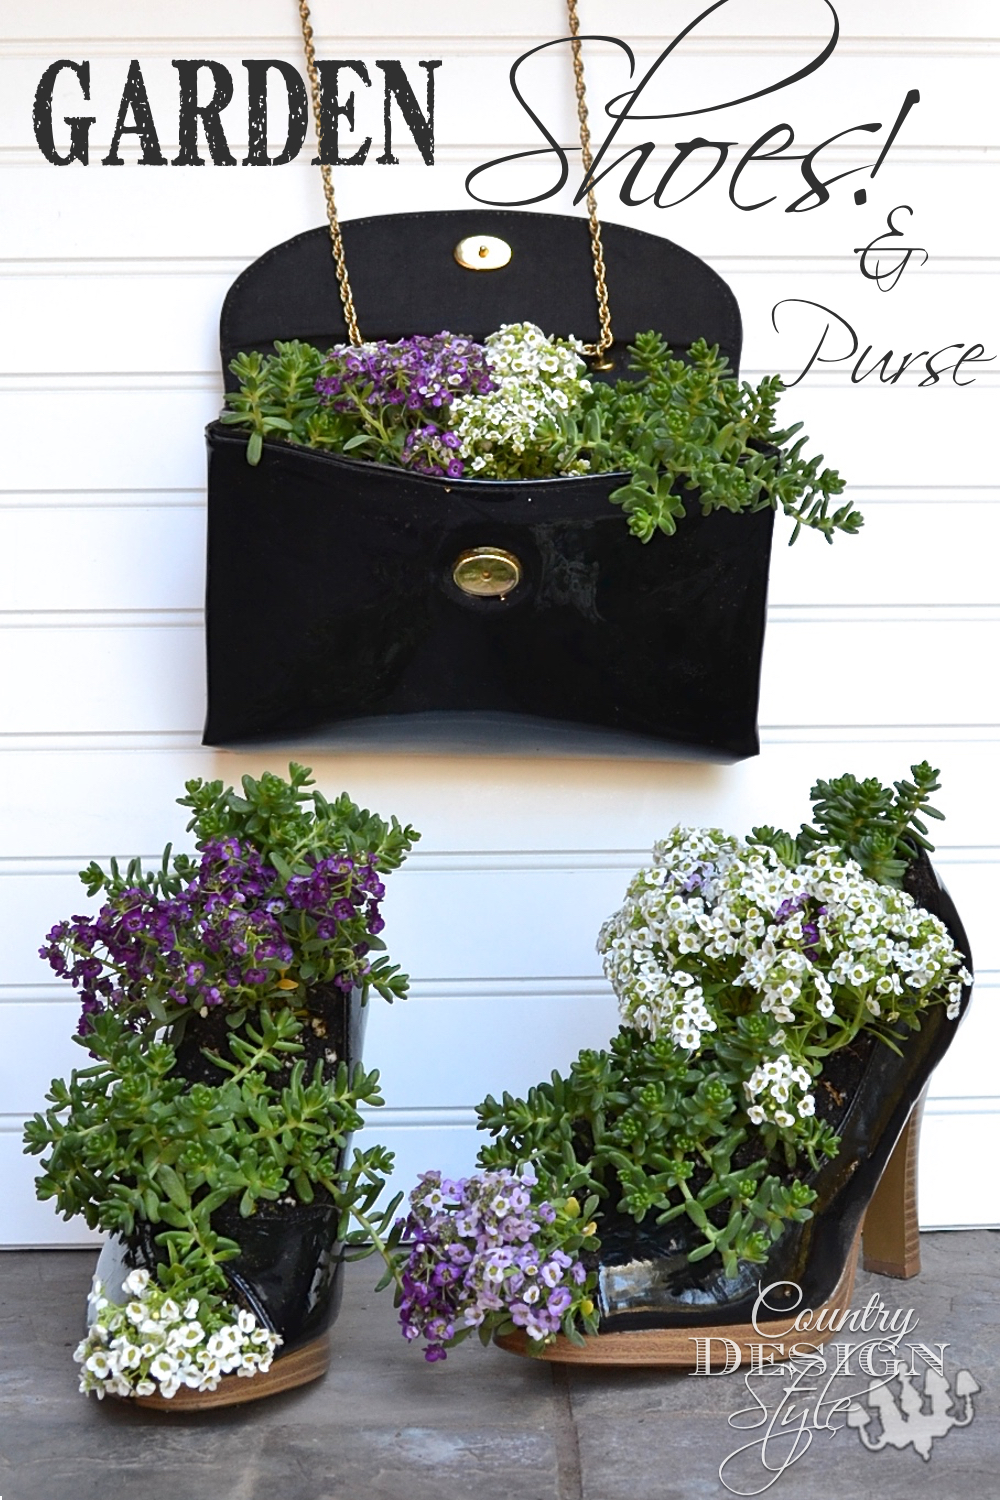 7 planter ideas from recycled footwear